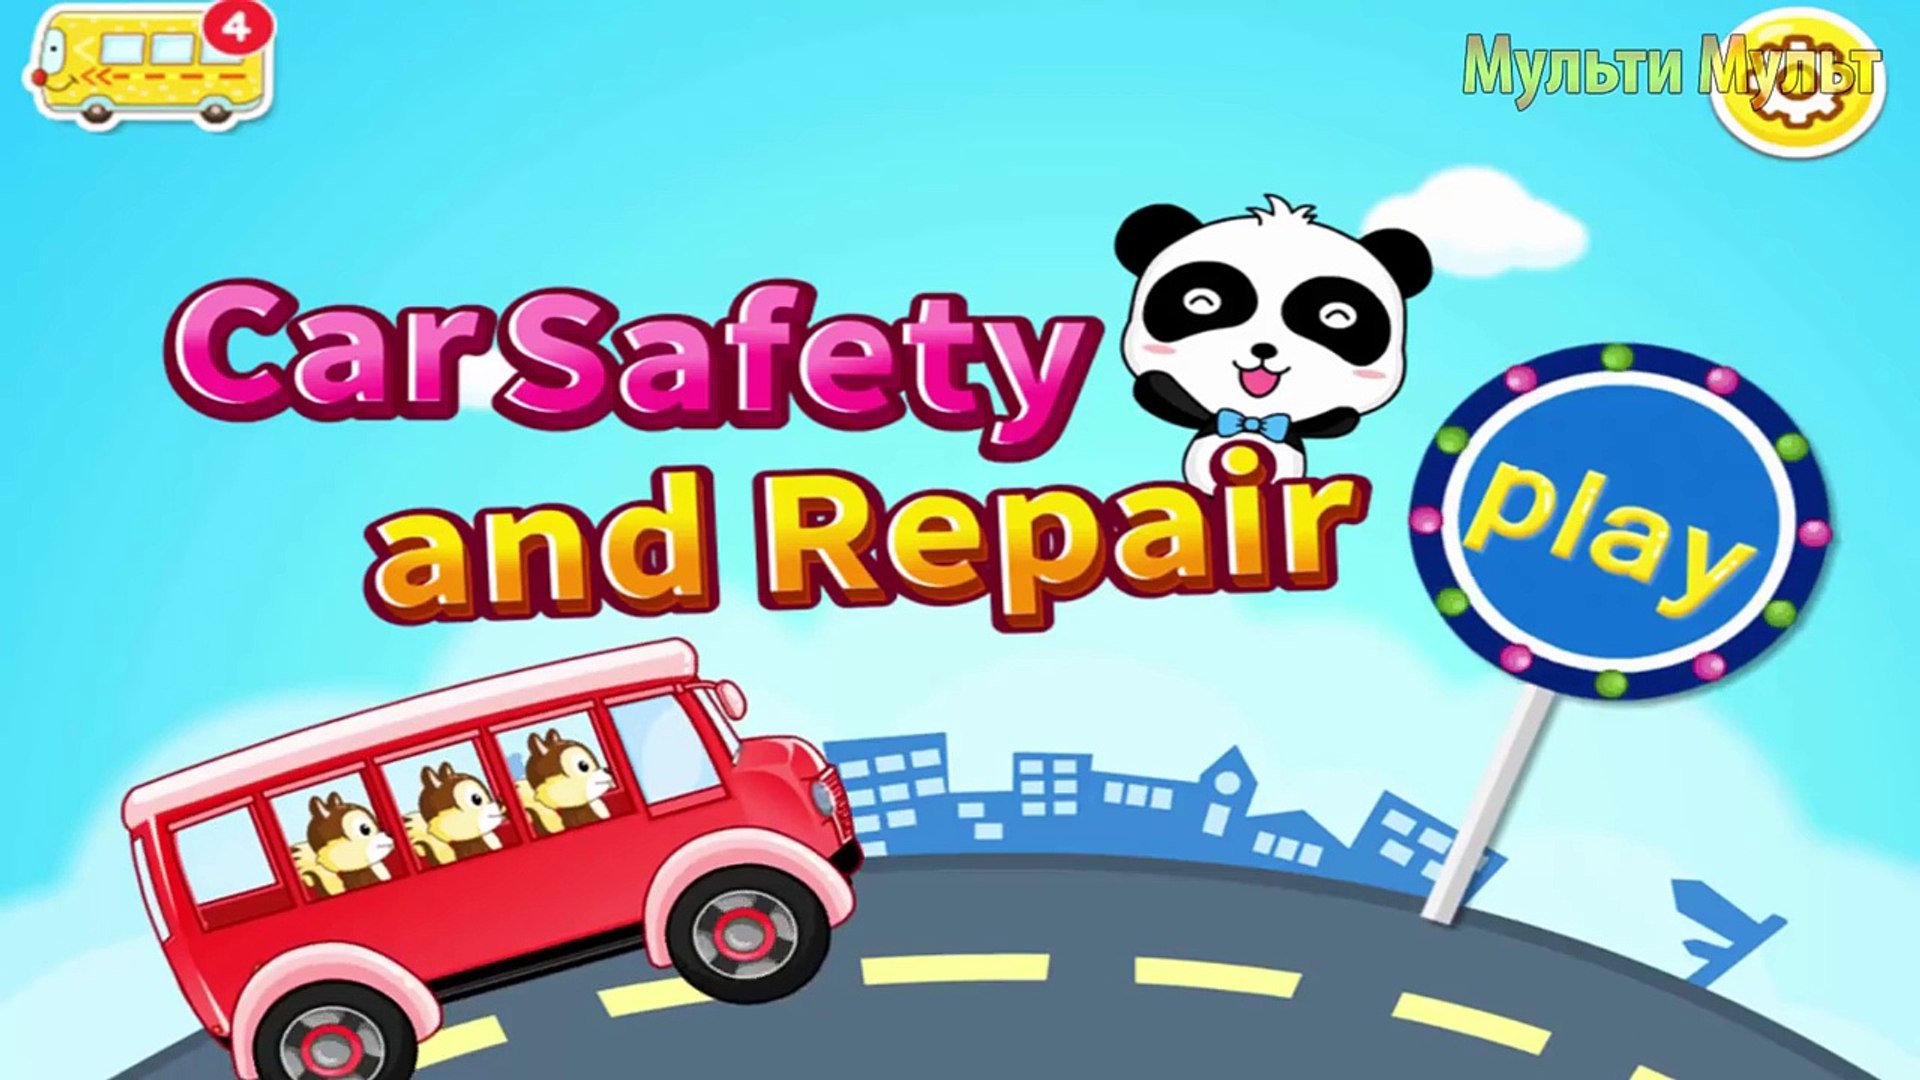 ⁣Cartoon about Cars for Kids - Car service & Car Wash : Dream Cars Factory